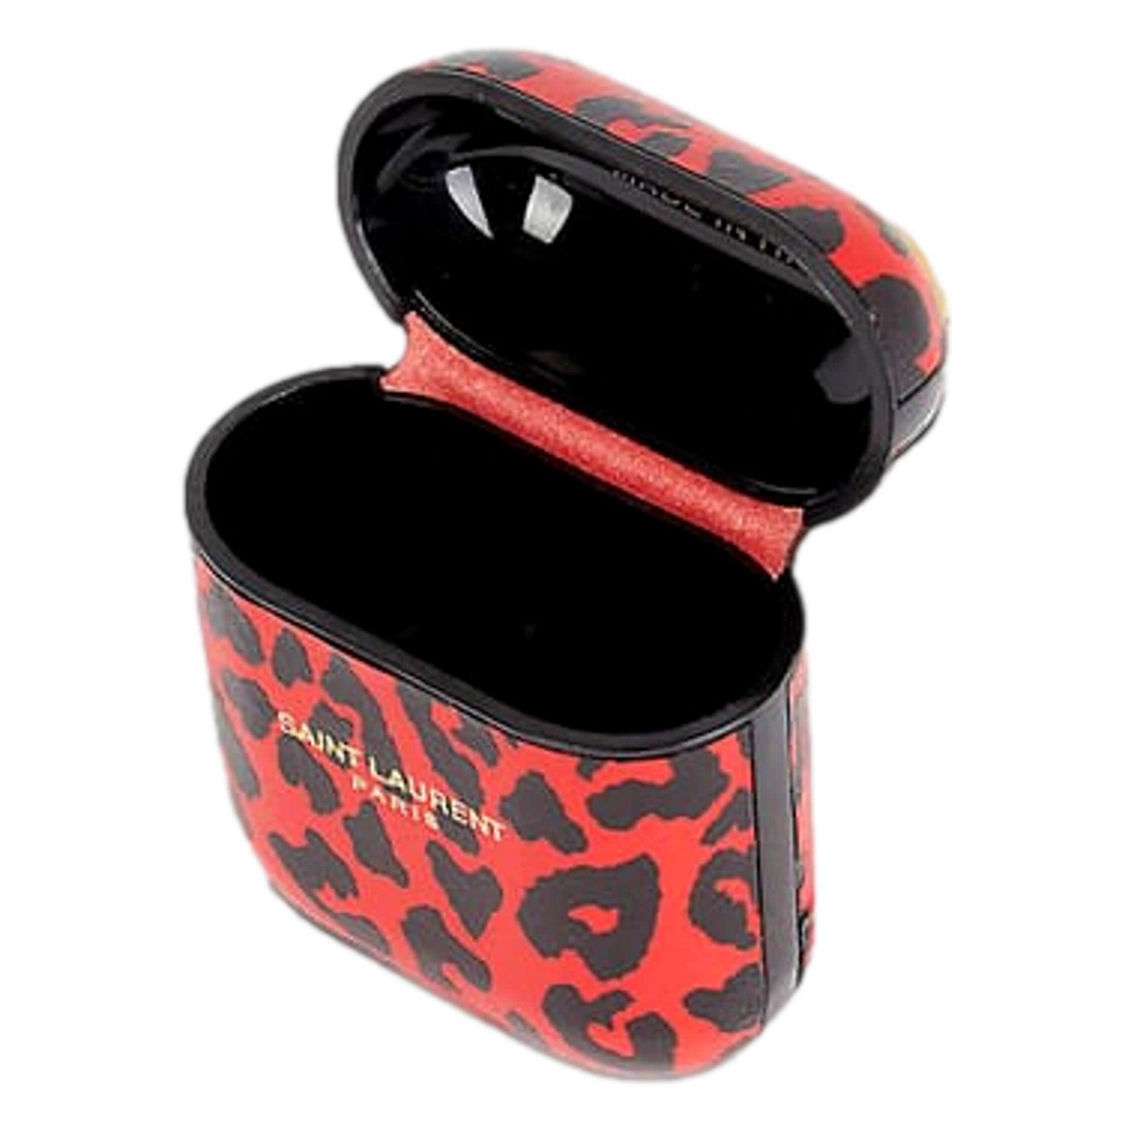 Saint Laurent Leopard Print Black and Red Leather Airpods Case (New) - Image 4 of 5